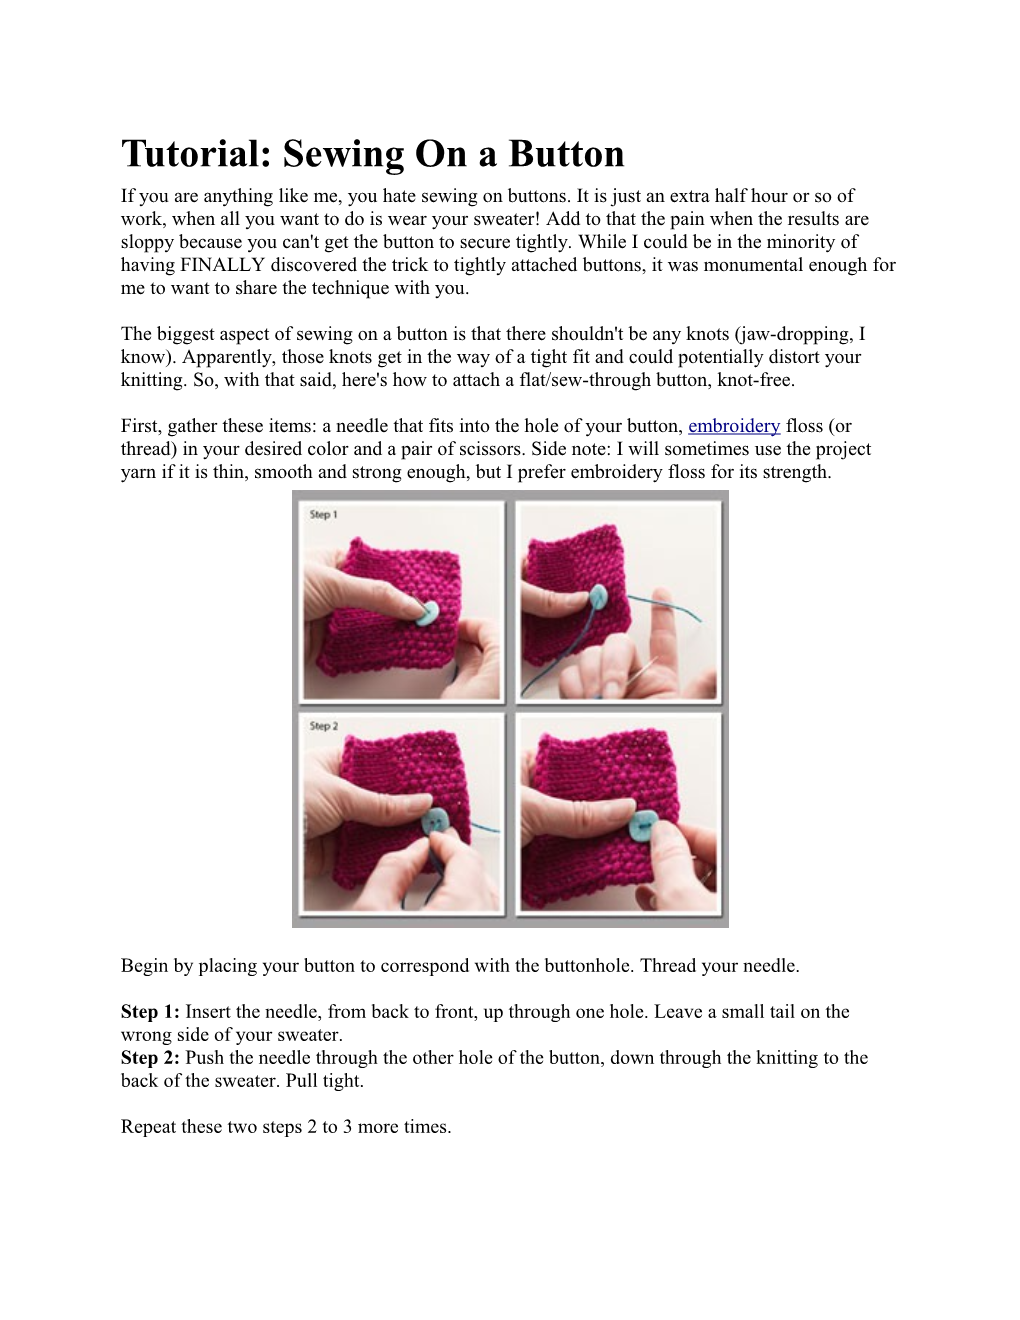 Tutorial: Sewing on a Button